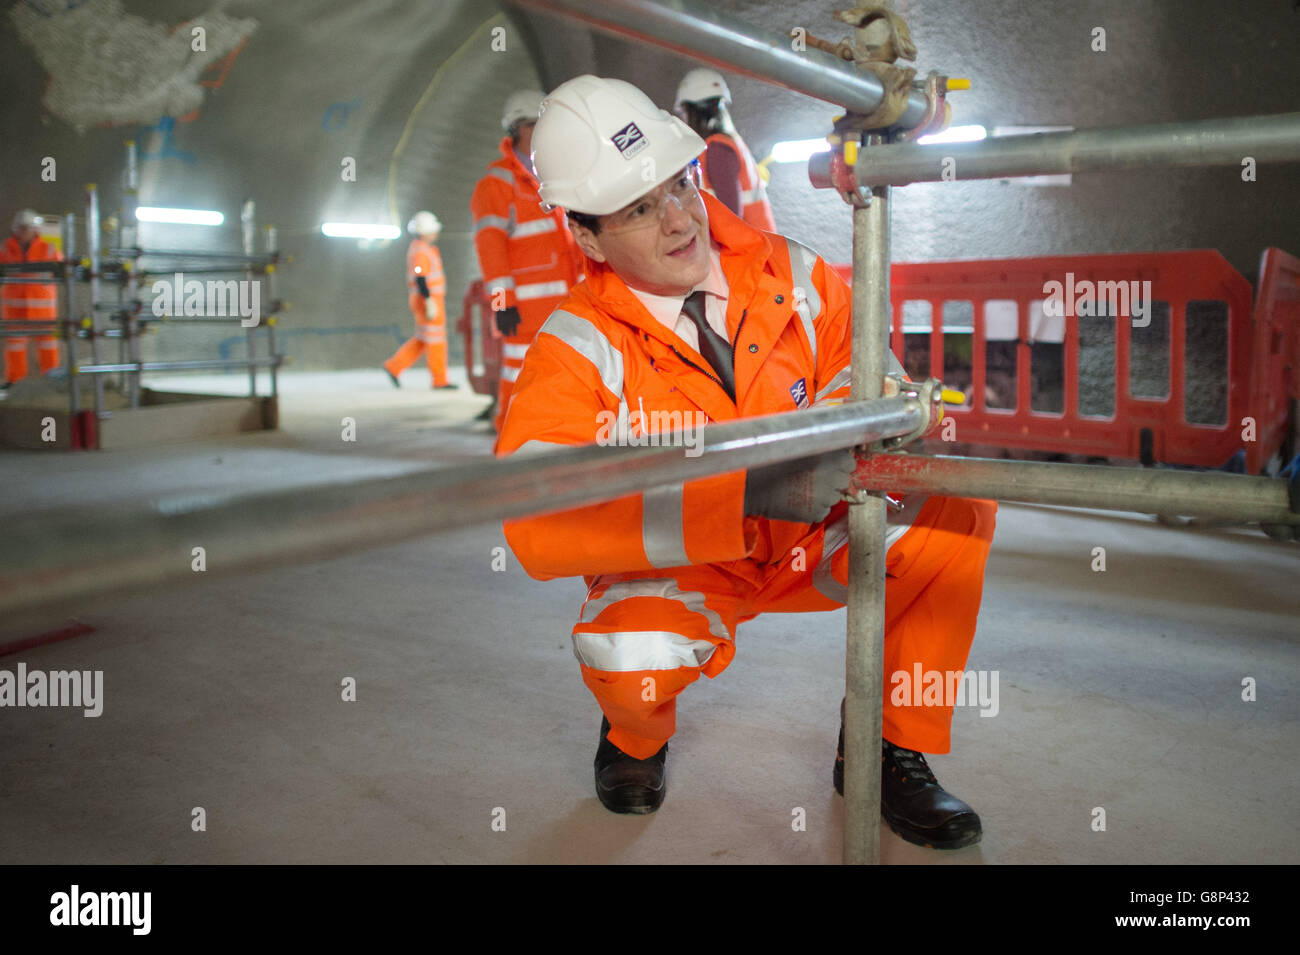 Chancellor of the Exchequer George Osborne visits the Crossrail station construction site at Tottenham Court Road in central London where he helped to build a section of scaffolding and met with engineers. Stock Photo